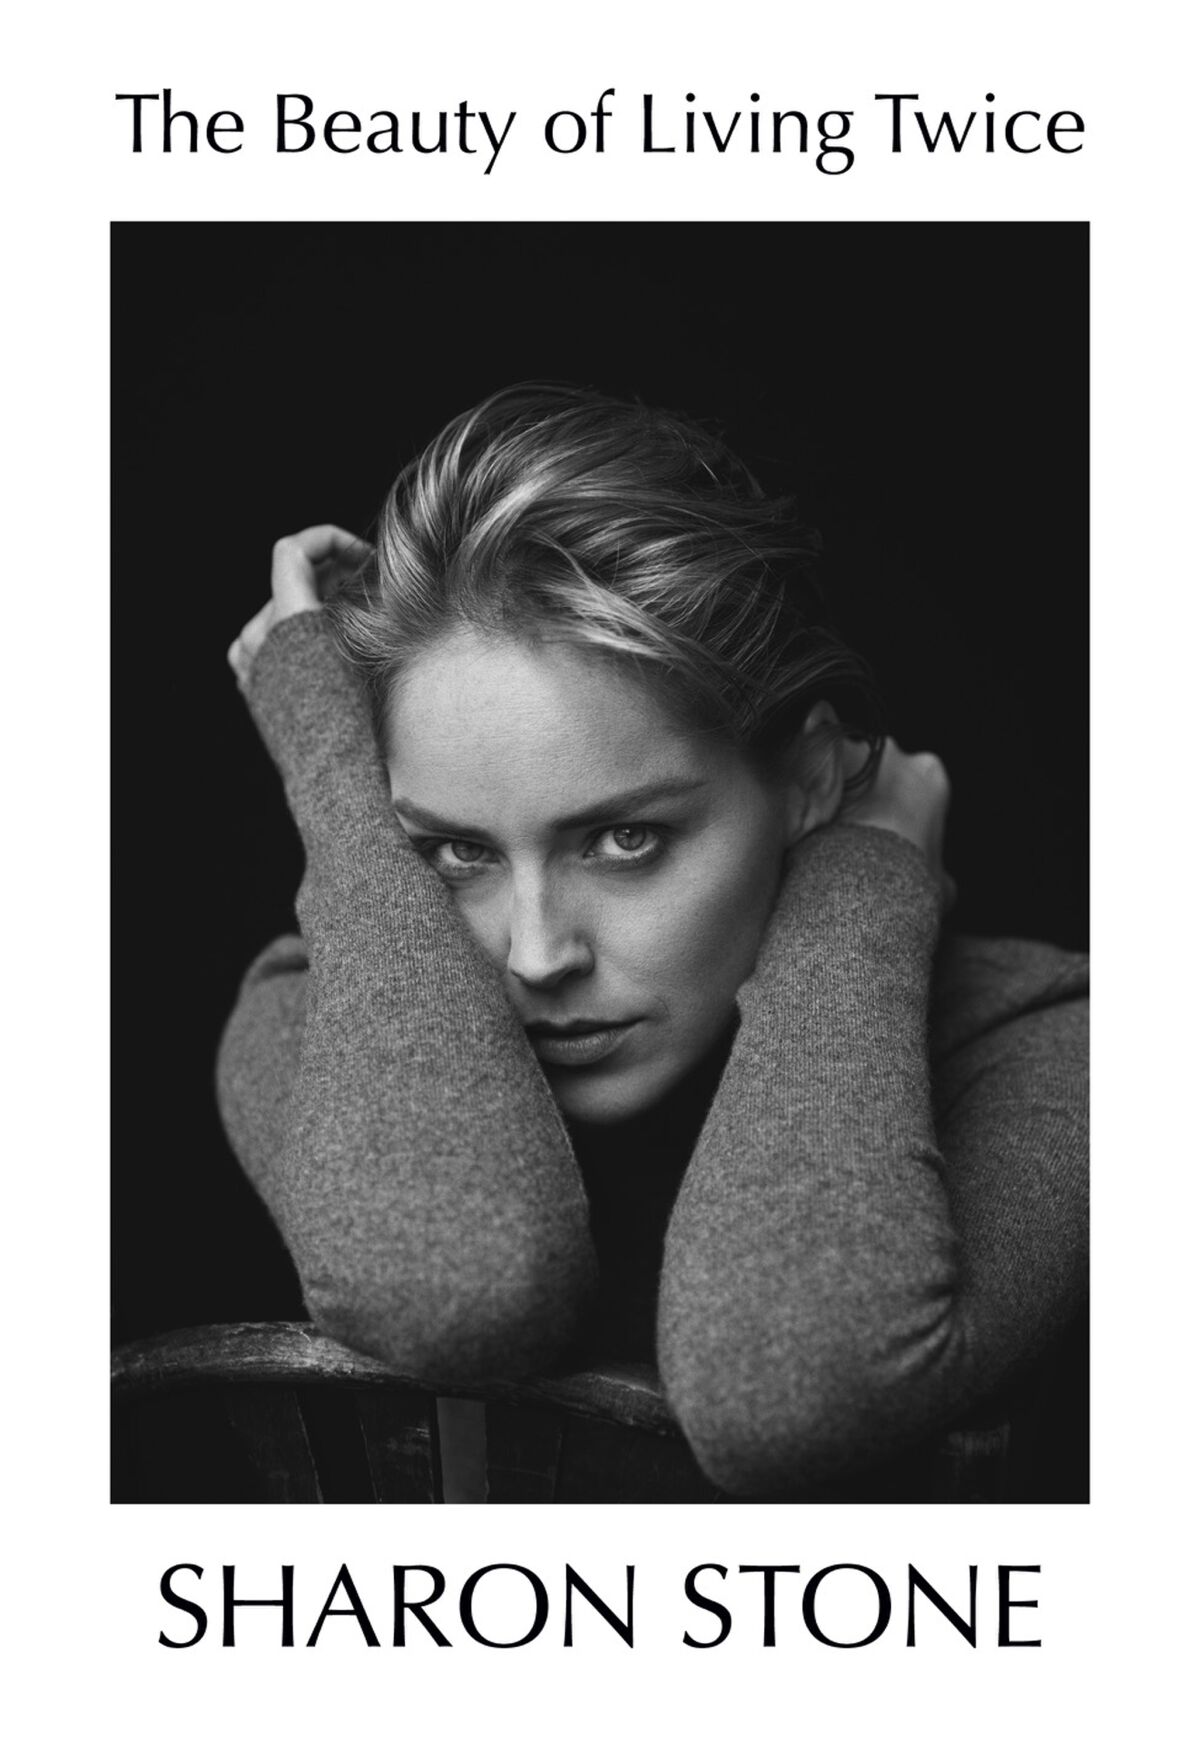 This cover image provided by Alfred A. Knopf shows "The Beauty of Living Twice" by Sharon Stone, expected in March 2021. Stone takes on everything from her painful childhood in Pennsylvania to her star-making role in the erotic thriller “Basic Instinct” to Martin Scorsese’s mobster epic “Casino,” for which she received an Academy Award nomination and a Golden Globe award. She’ll also write about her near-fatal stroke in 2001 and her humanitarian work on behalf of AIDS research and other causes. (Alfred A. Knopf via AP)